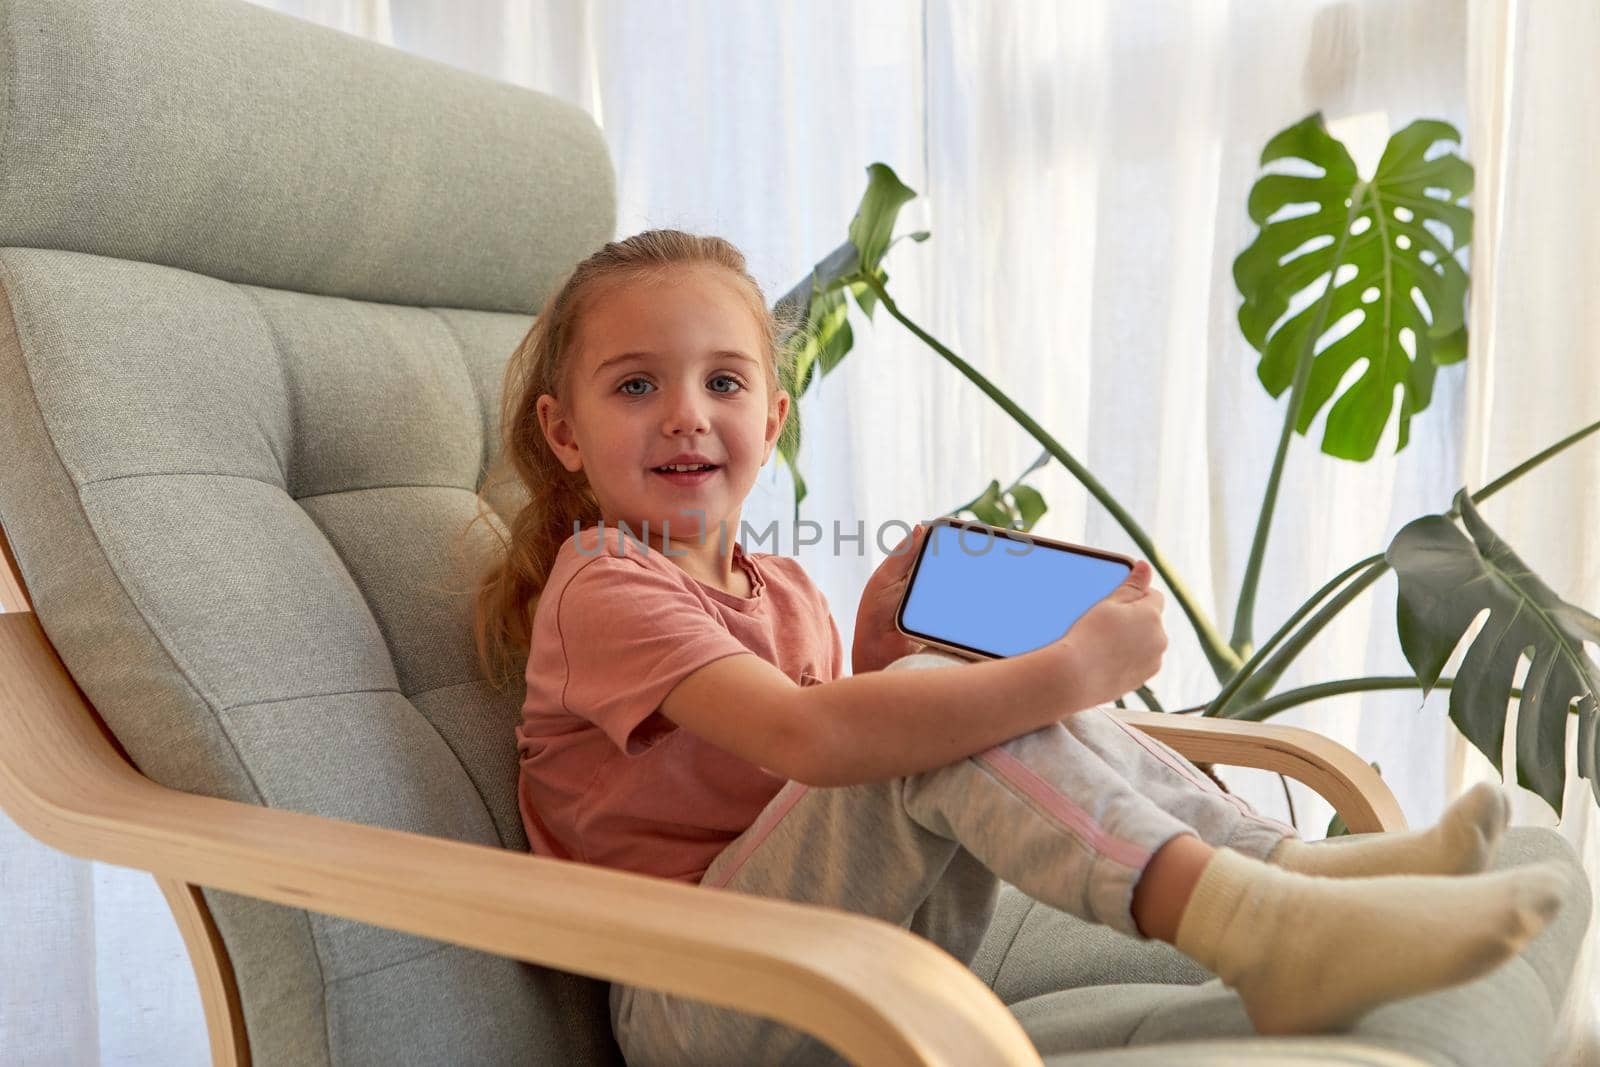 Cute child showing mobile phone while sitting on armchair by Demkat